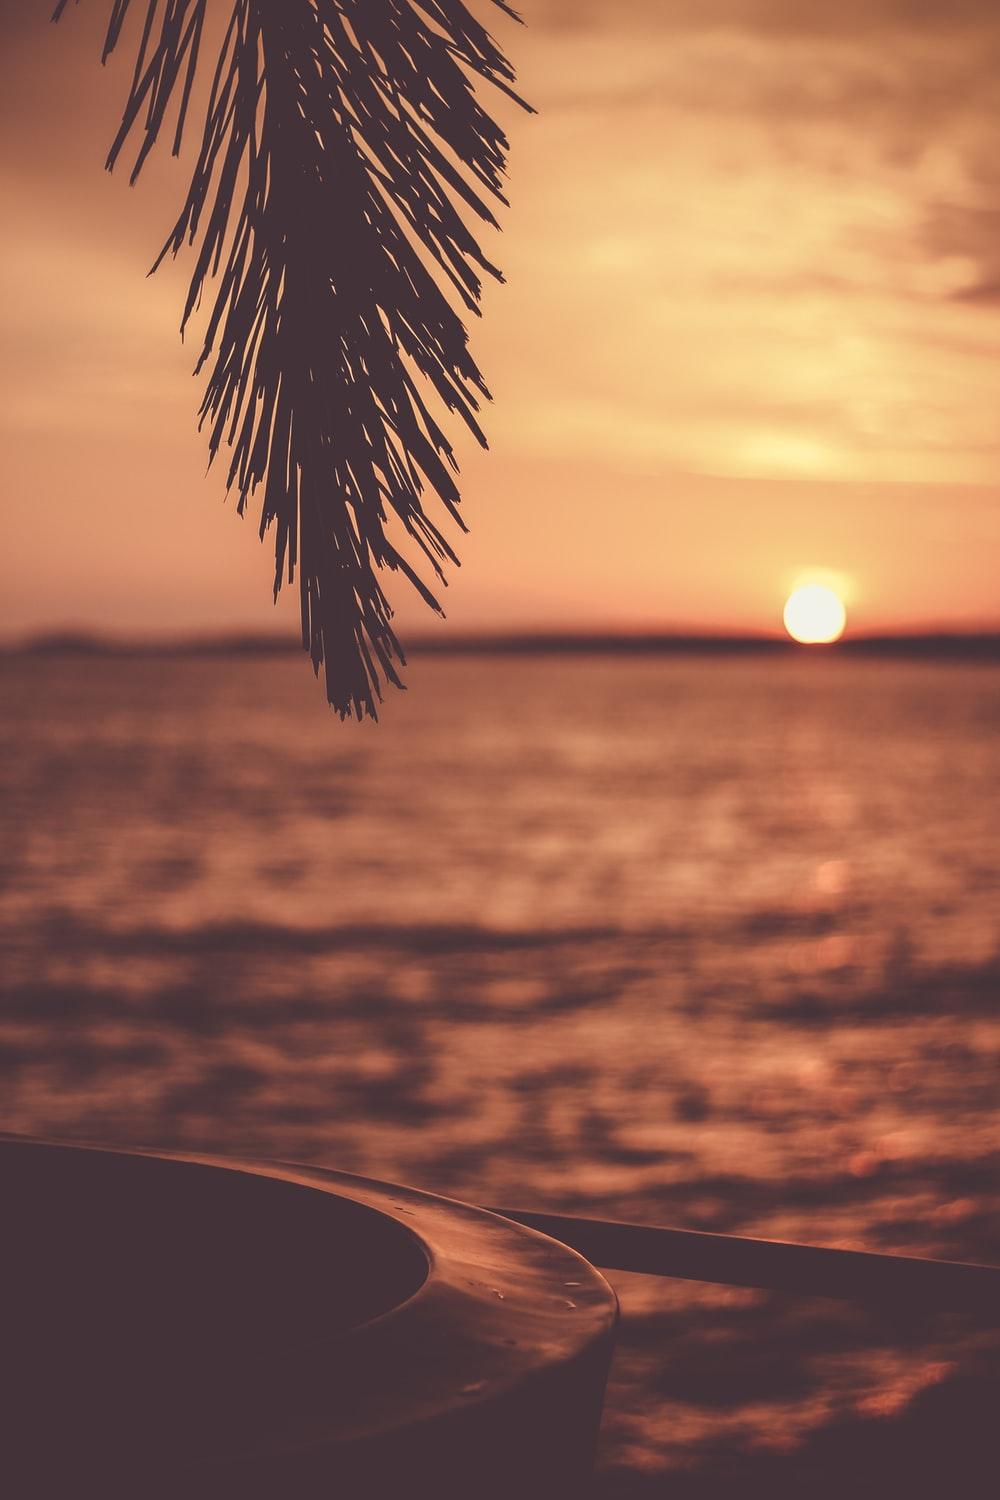 Stunning Tropical Sunset Picture [HD]. Download Free